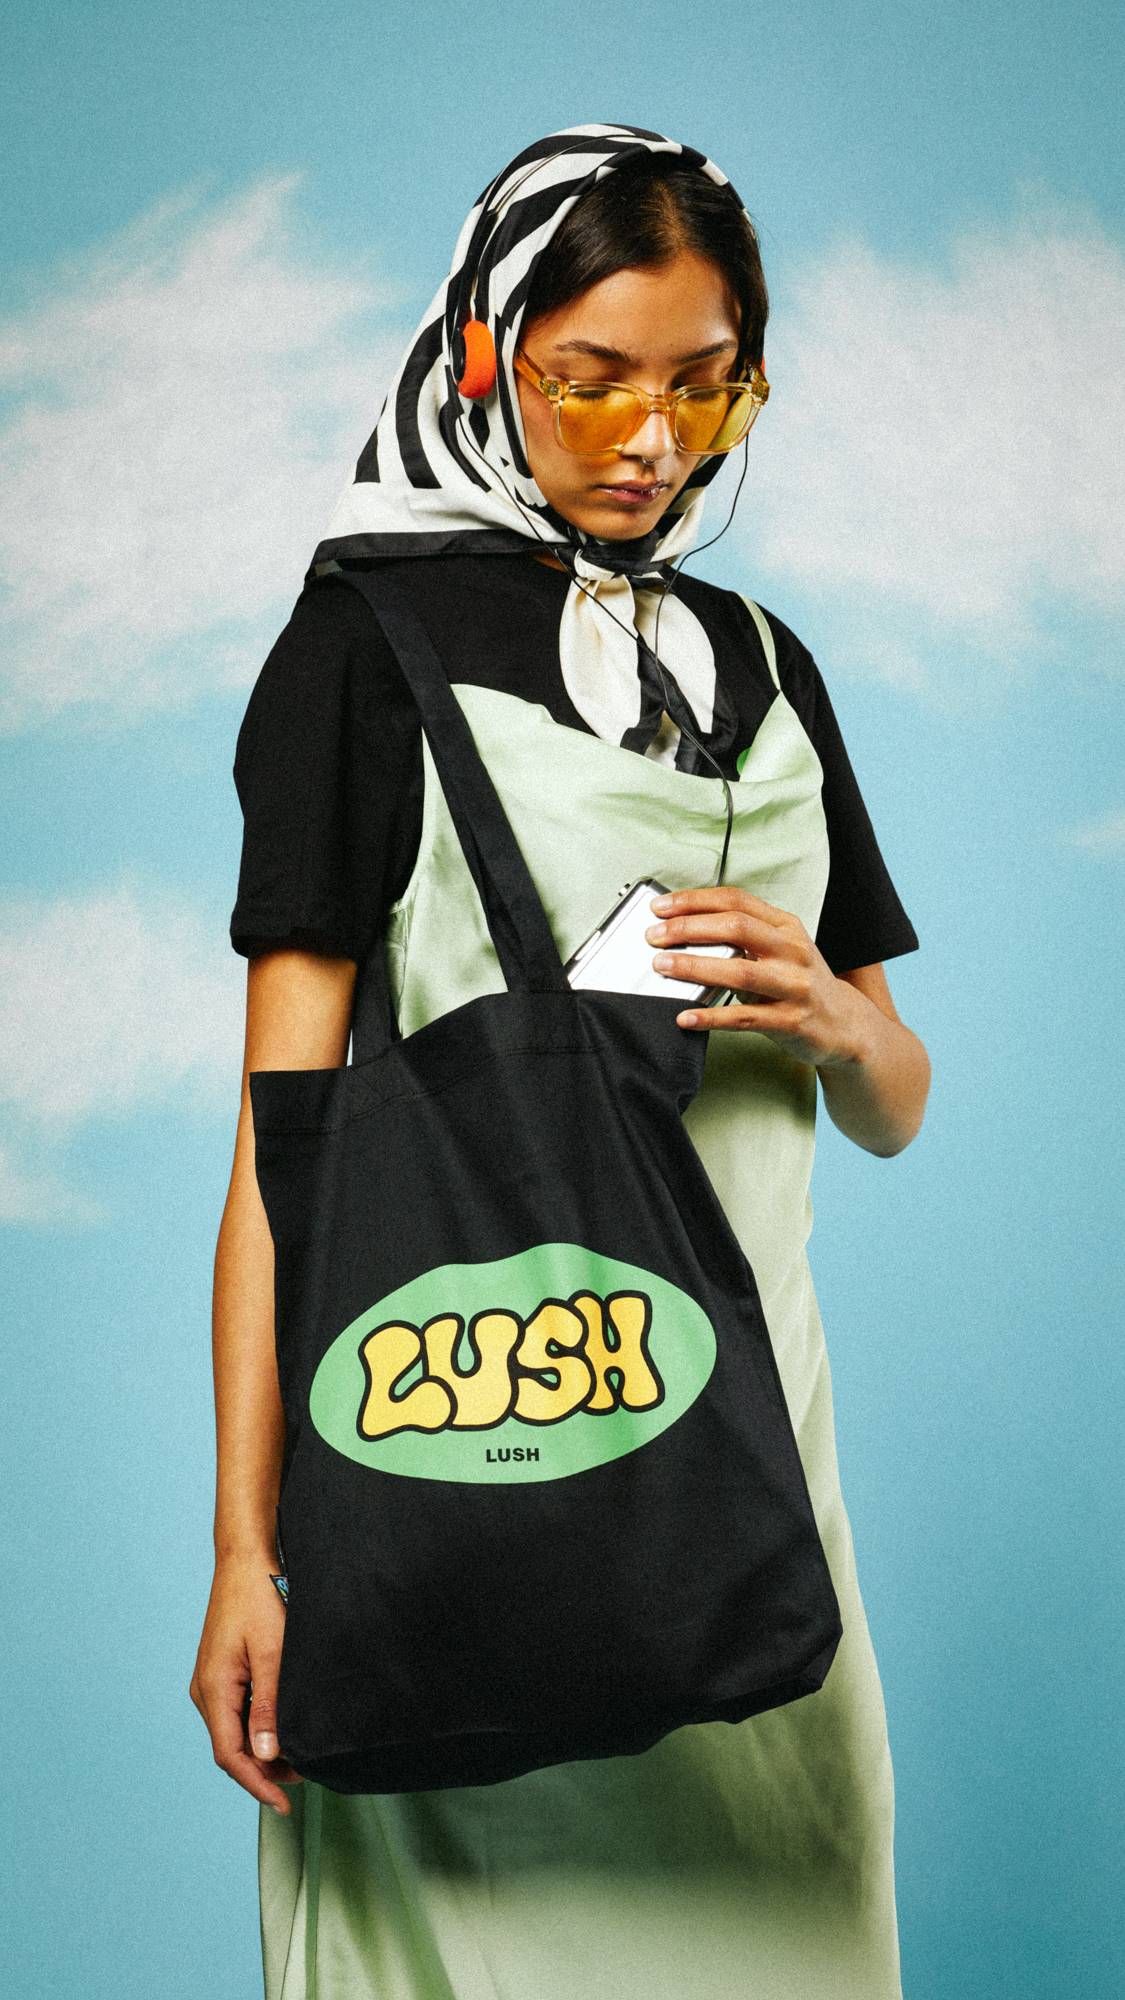 Model is stood on a sky-like background with a head scarf and headphones, wearing the Retro Bubble tote bag.